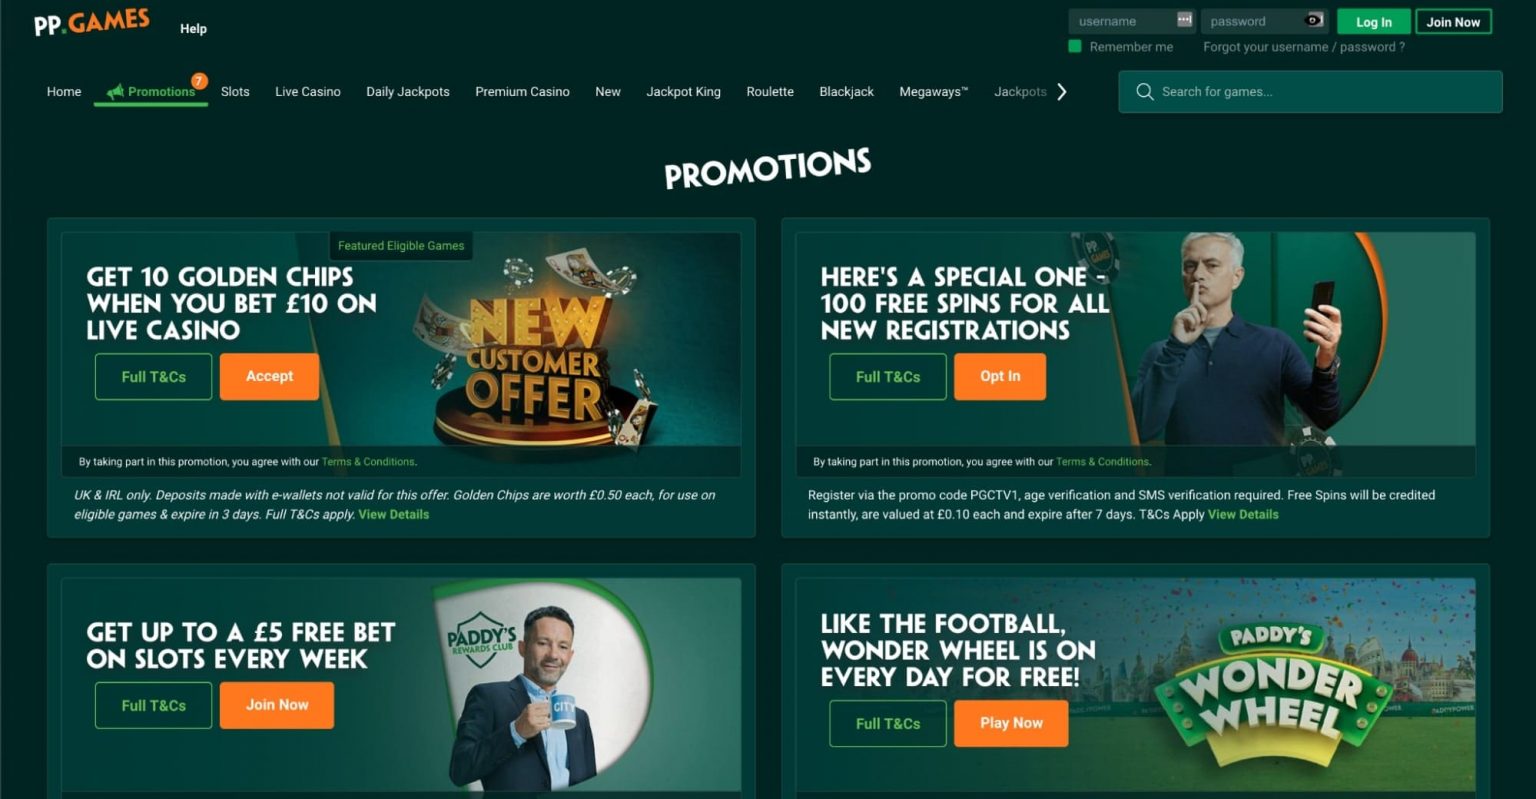 paddy power casino promotions